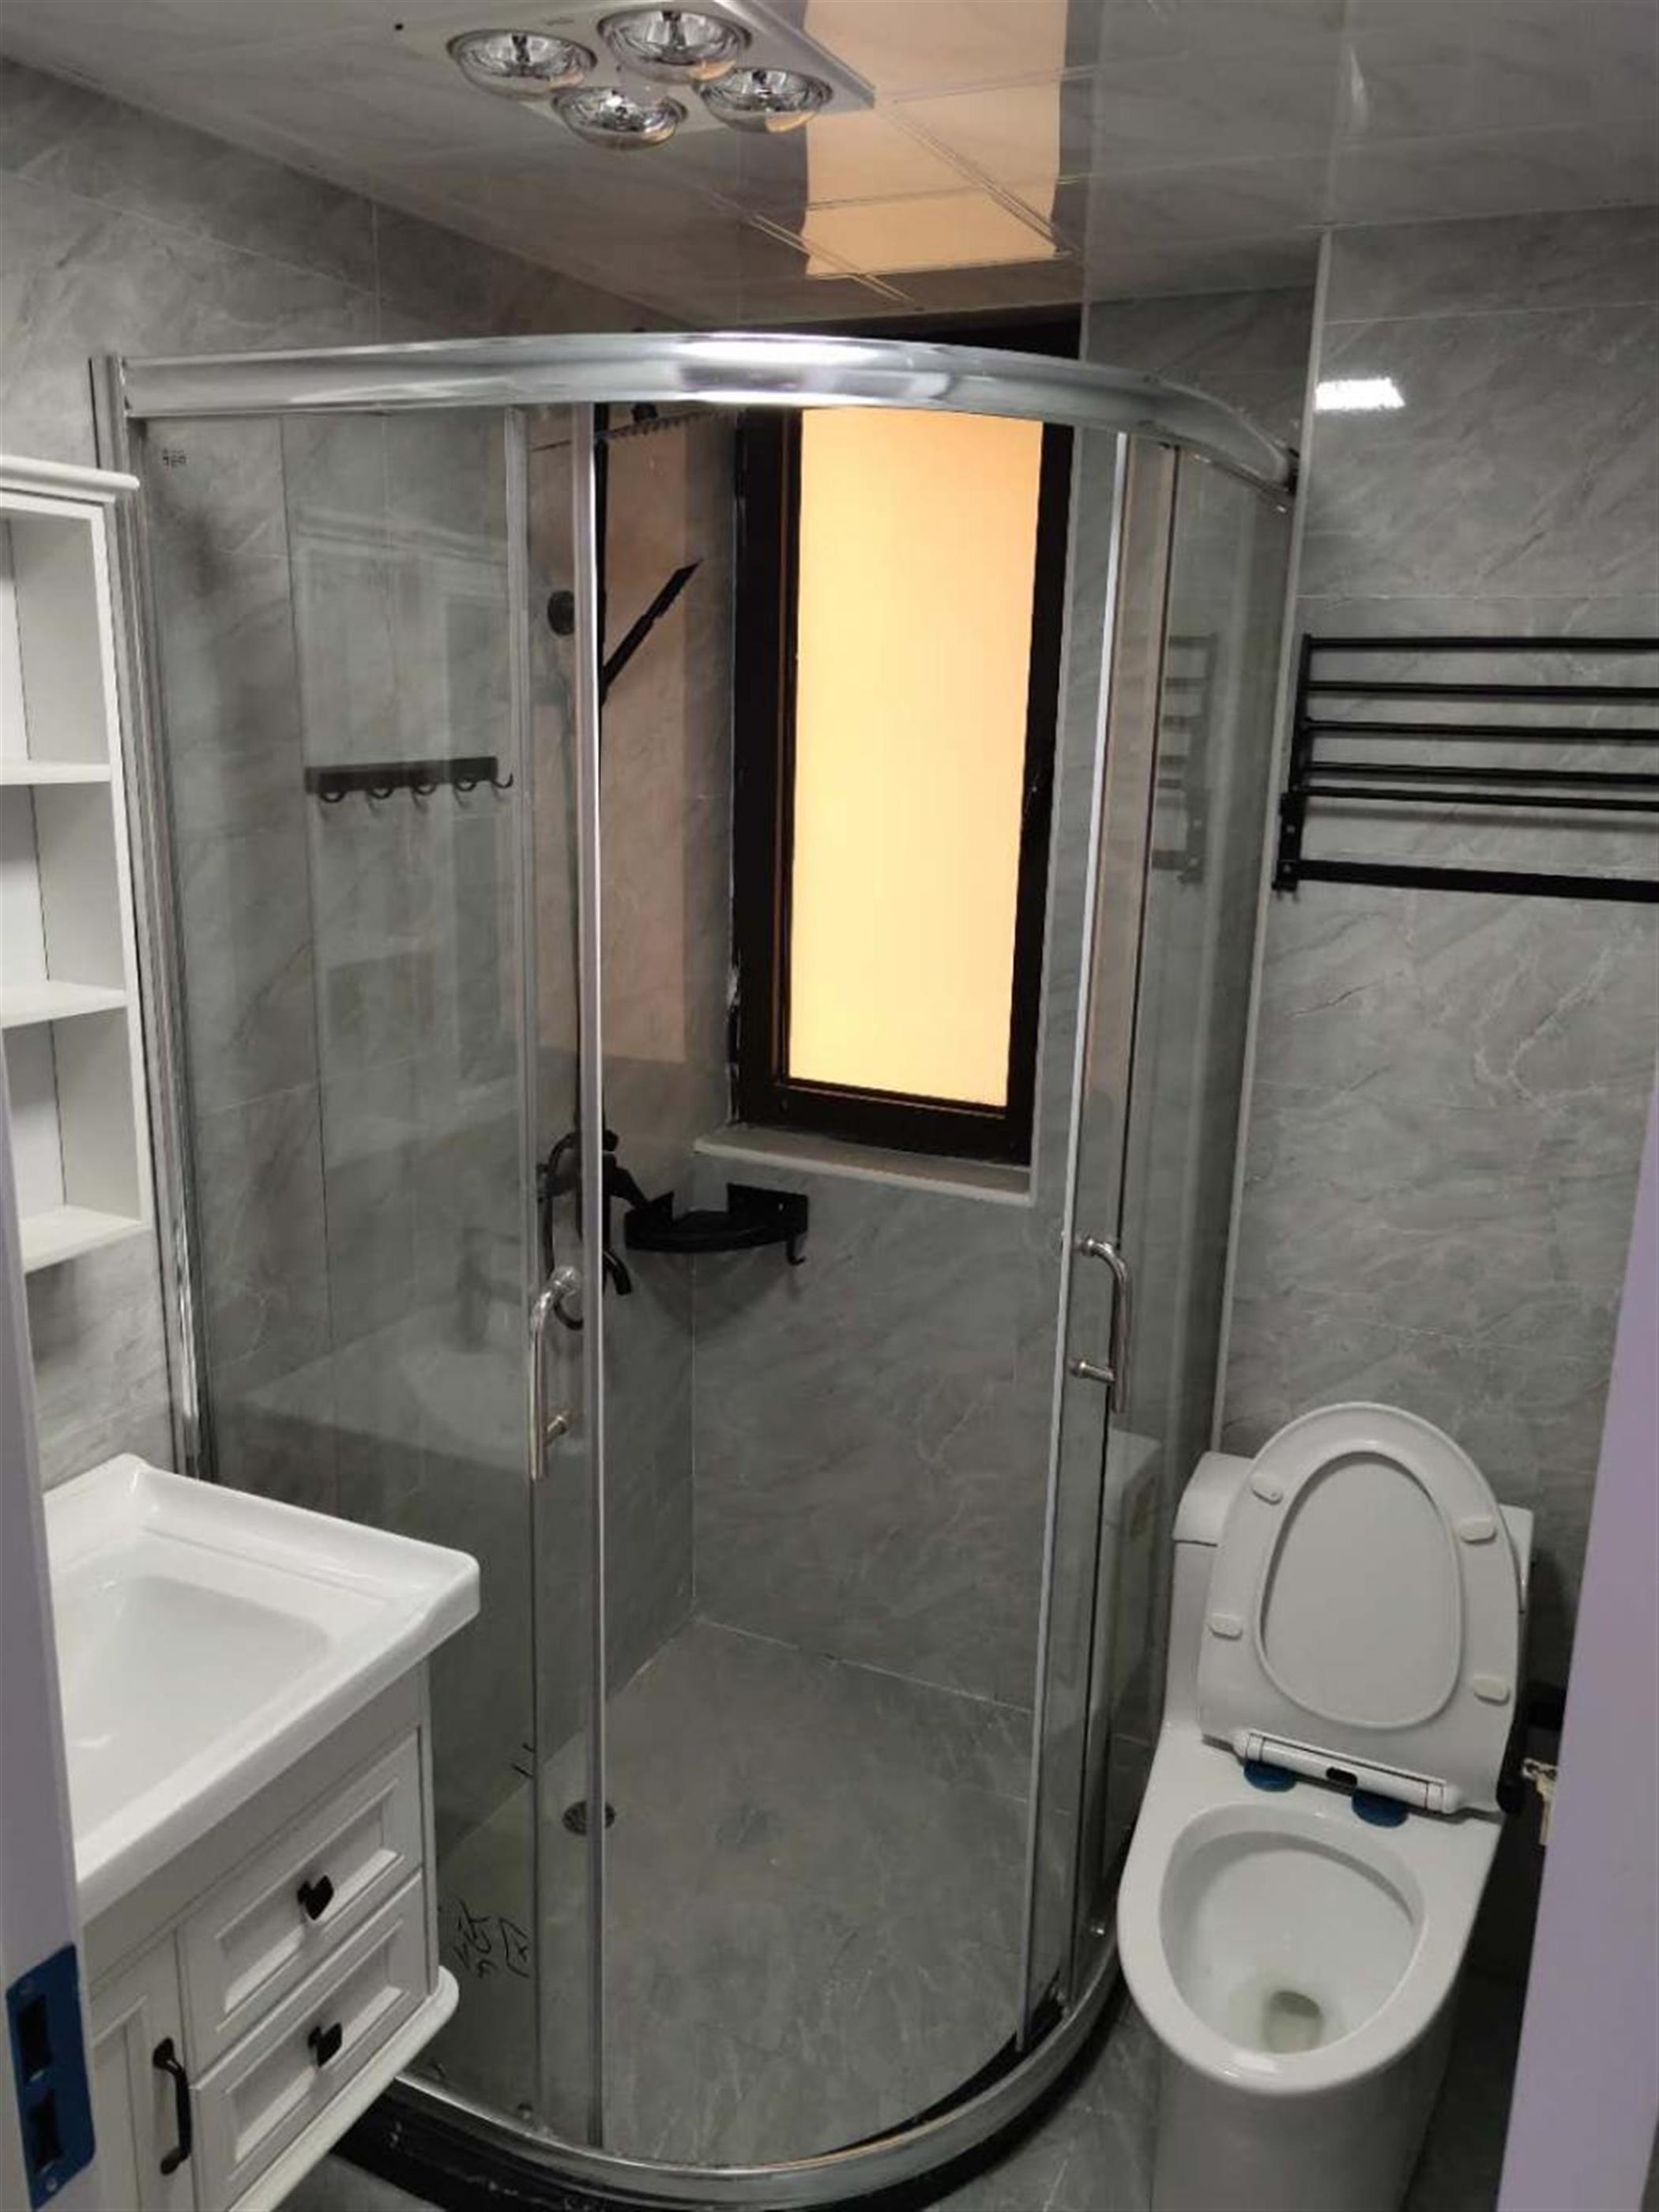 Clean Bathroom Newly Renovated Affordable Cozy 50sqm 1BR Apartment for Rent in Zhabei Shanghai